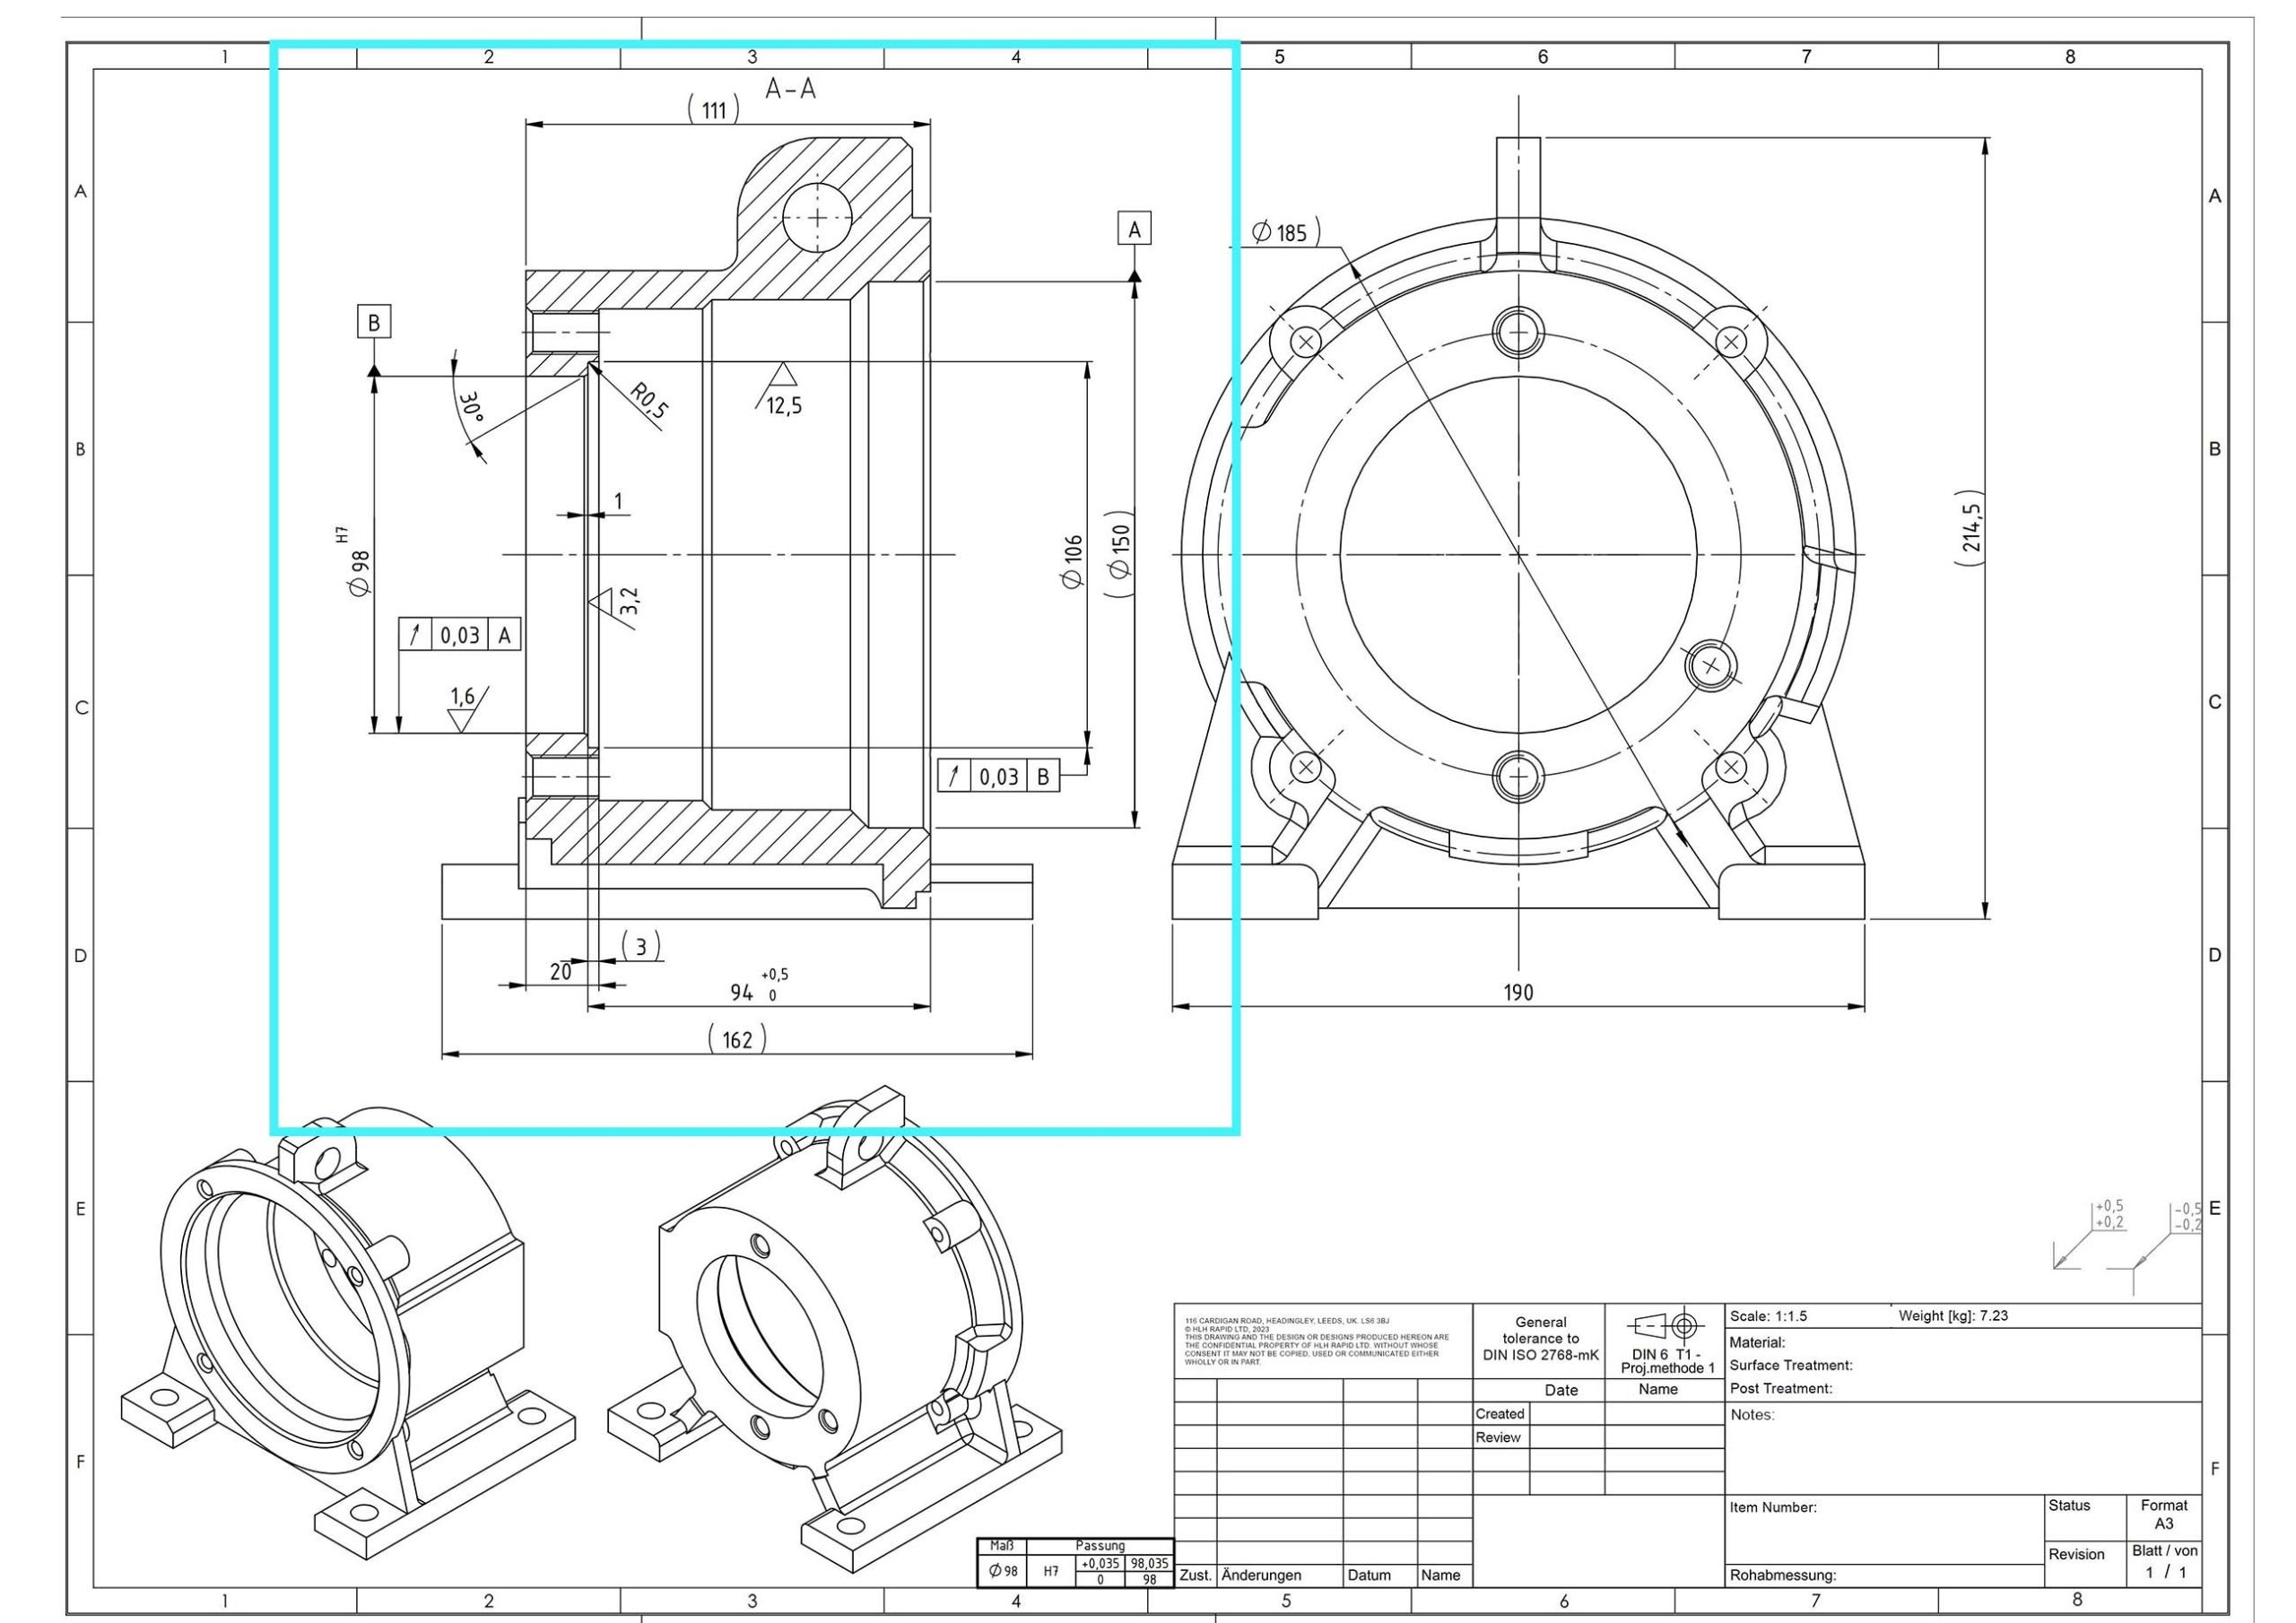 Aerosud Aviation - Geometric Dimensioning and Tolerancing (GD&T) is an  international language used on engineering drawings to communicate geometry  requirements from the designer to the manufacturer. GD&T promotes a uniform  understanding and